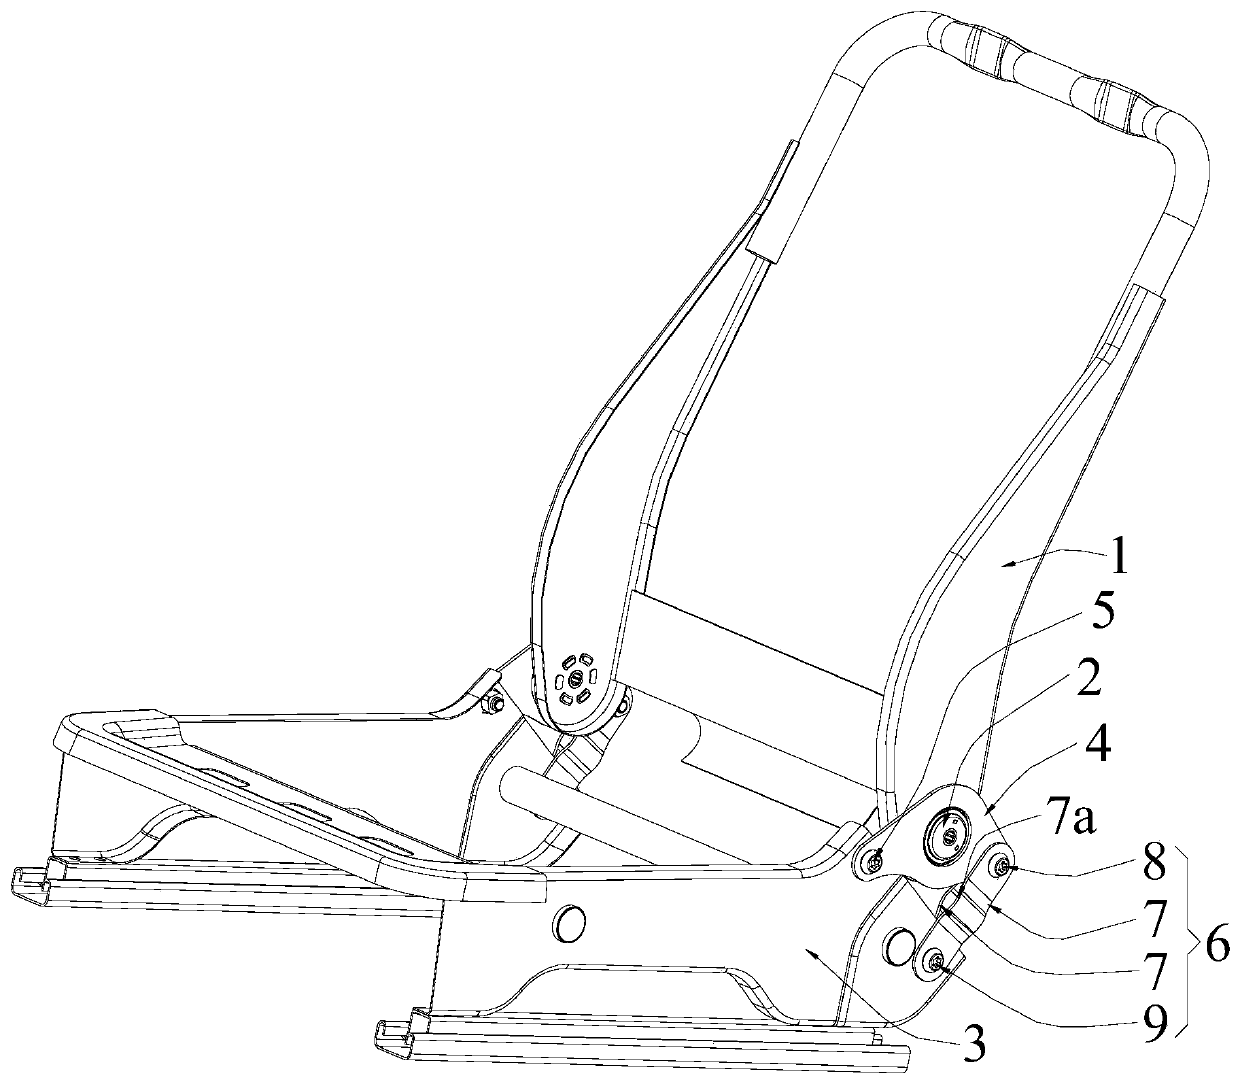 Crushing deformation type rear-end crash seat energy-absorbing structure